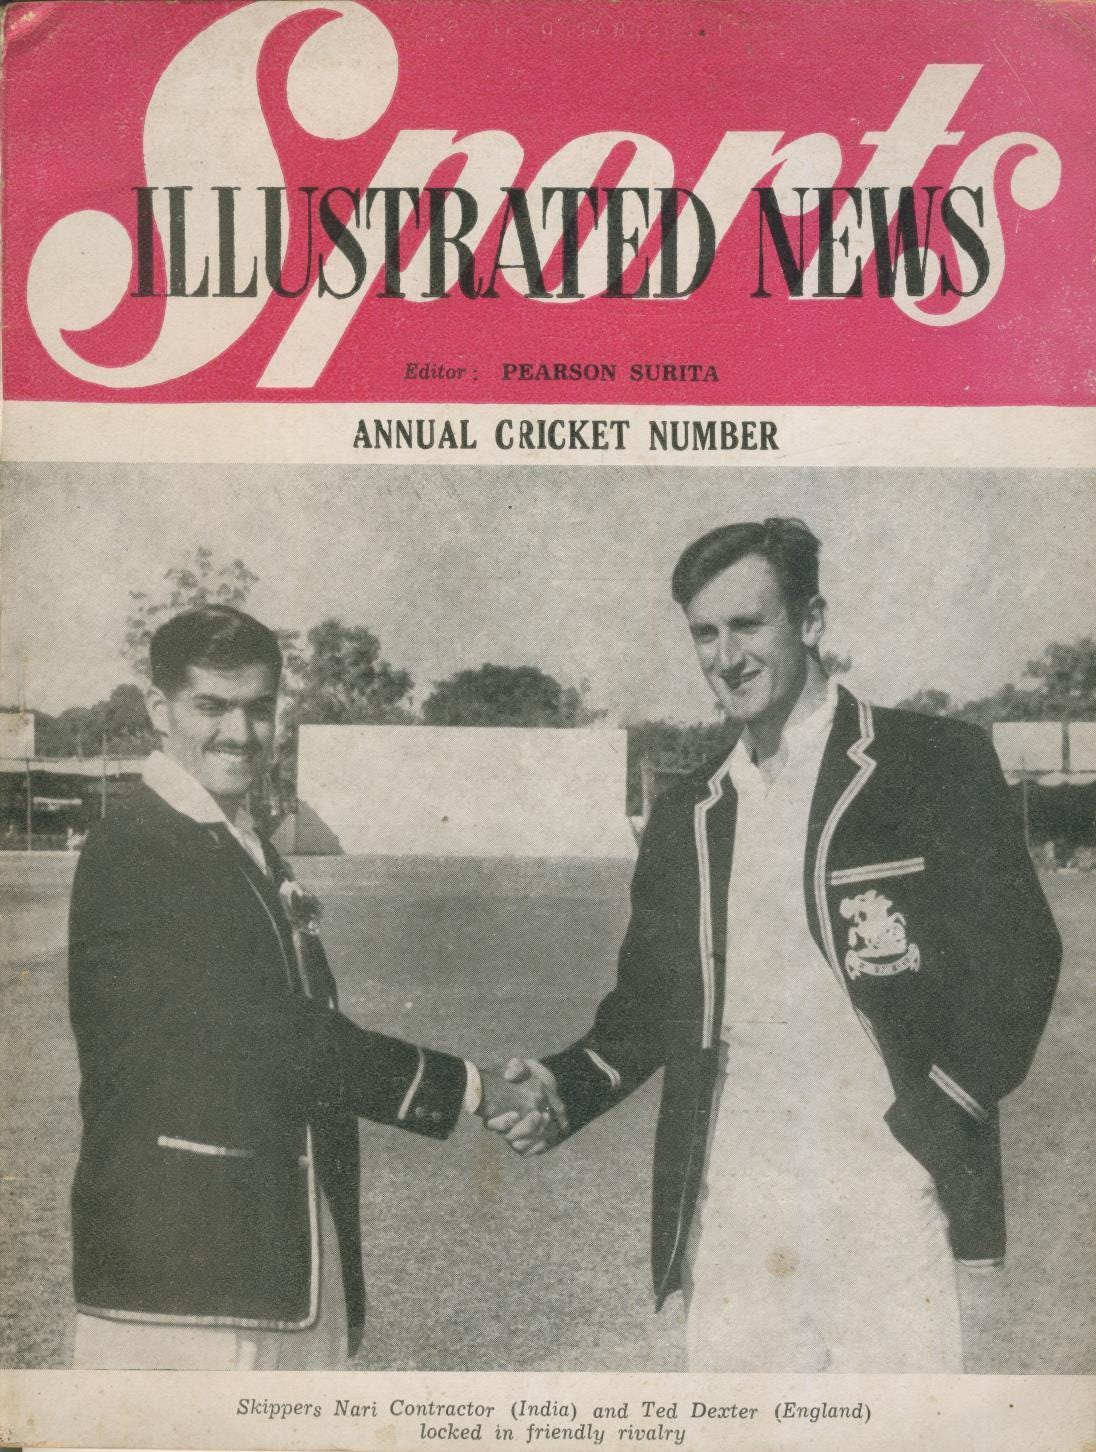 SPORTS ILLUSTRATED NEWS - ENGLAND CRICKET TOUR OF INDIA 1961-62 by Pearson  SURITA (editor) | Sportspages